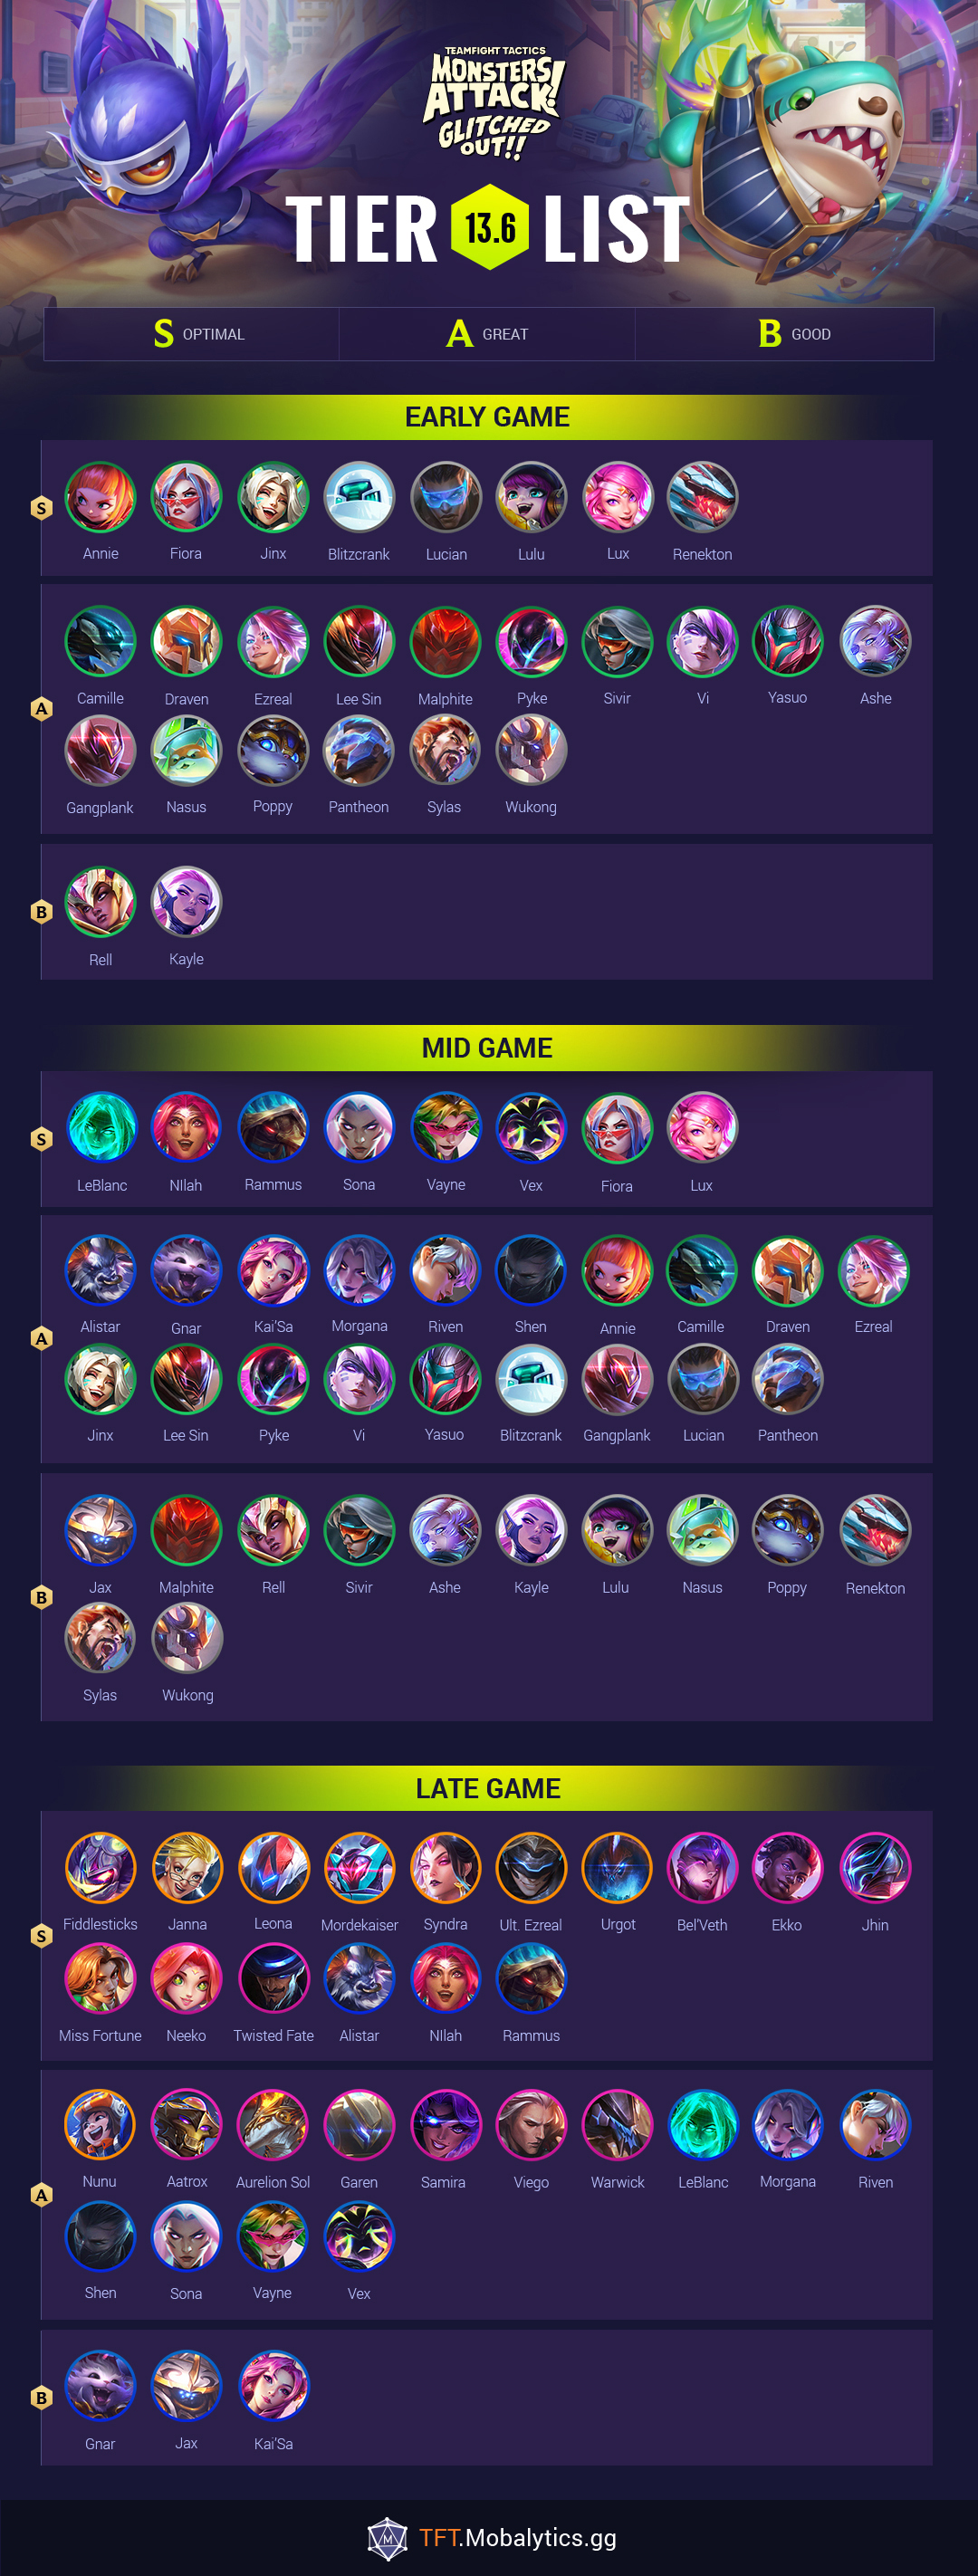 søn data Lure TFT Tier List: Best TFT Champions for Patch 13.6 - Mobalytics